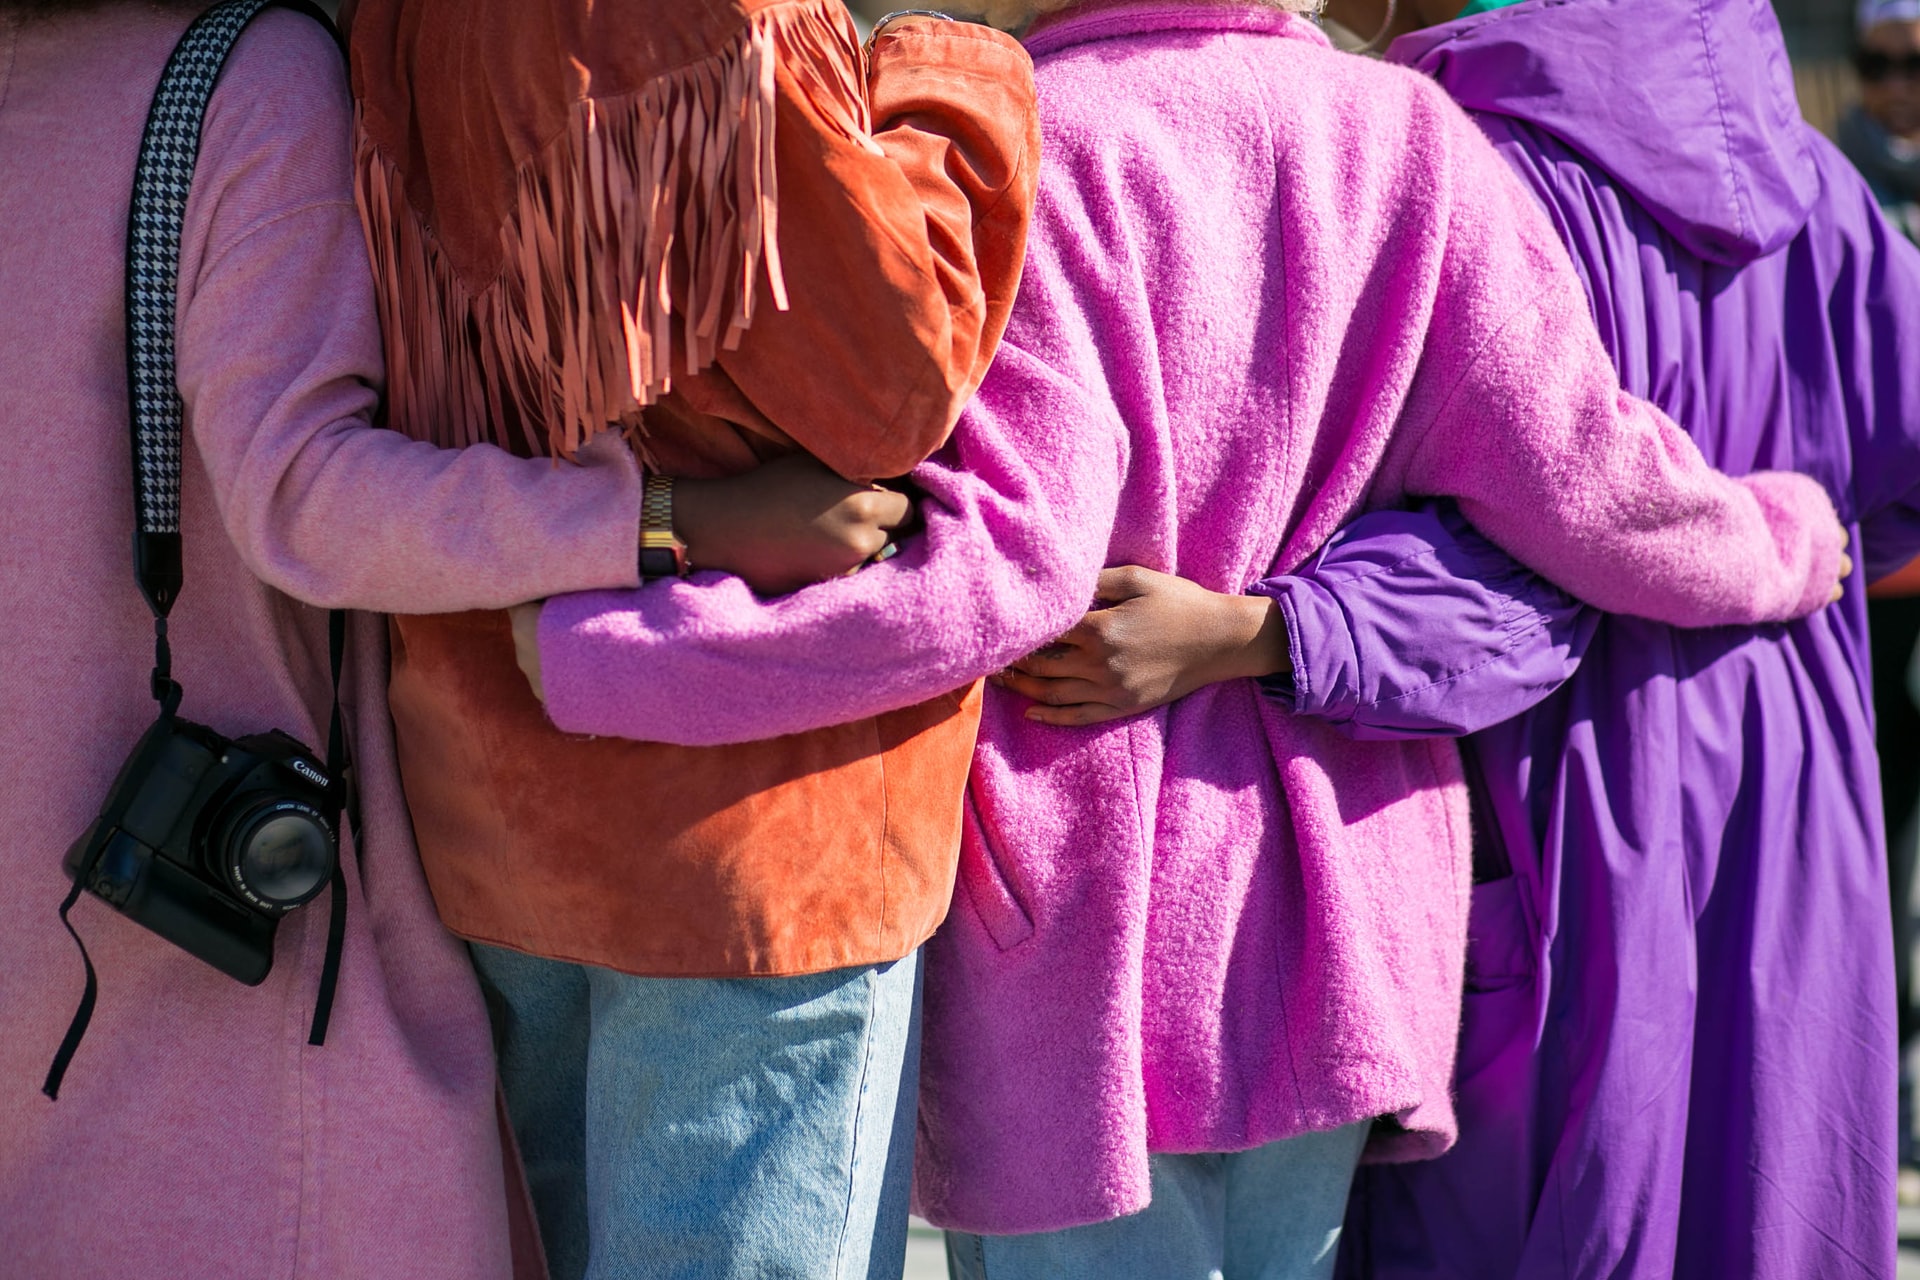 The picture is of 4 people's backs, they wear colourful coats in pink,orange, pink and purple as they have their arms around each others' backs.